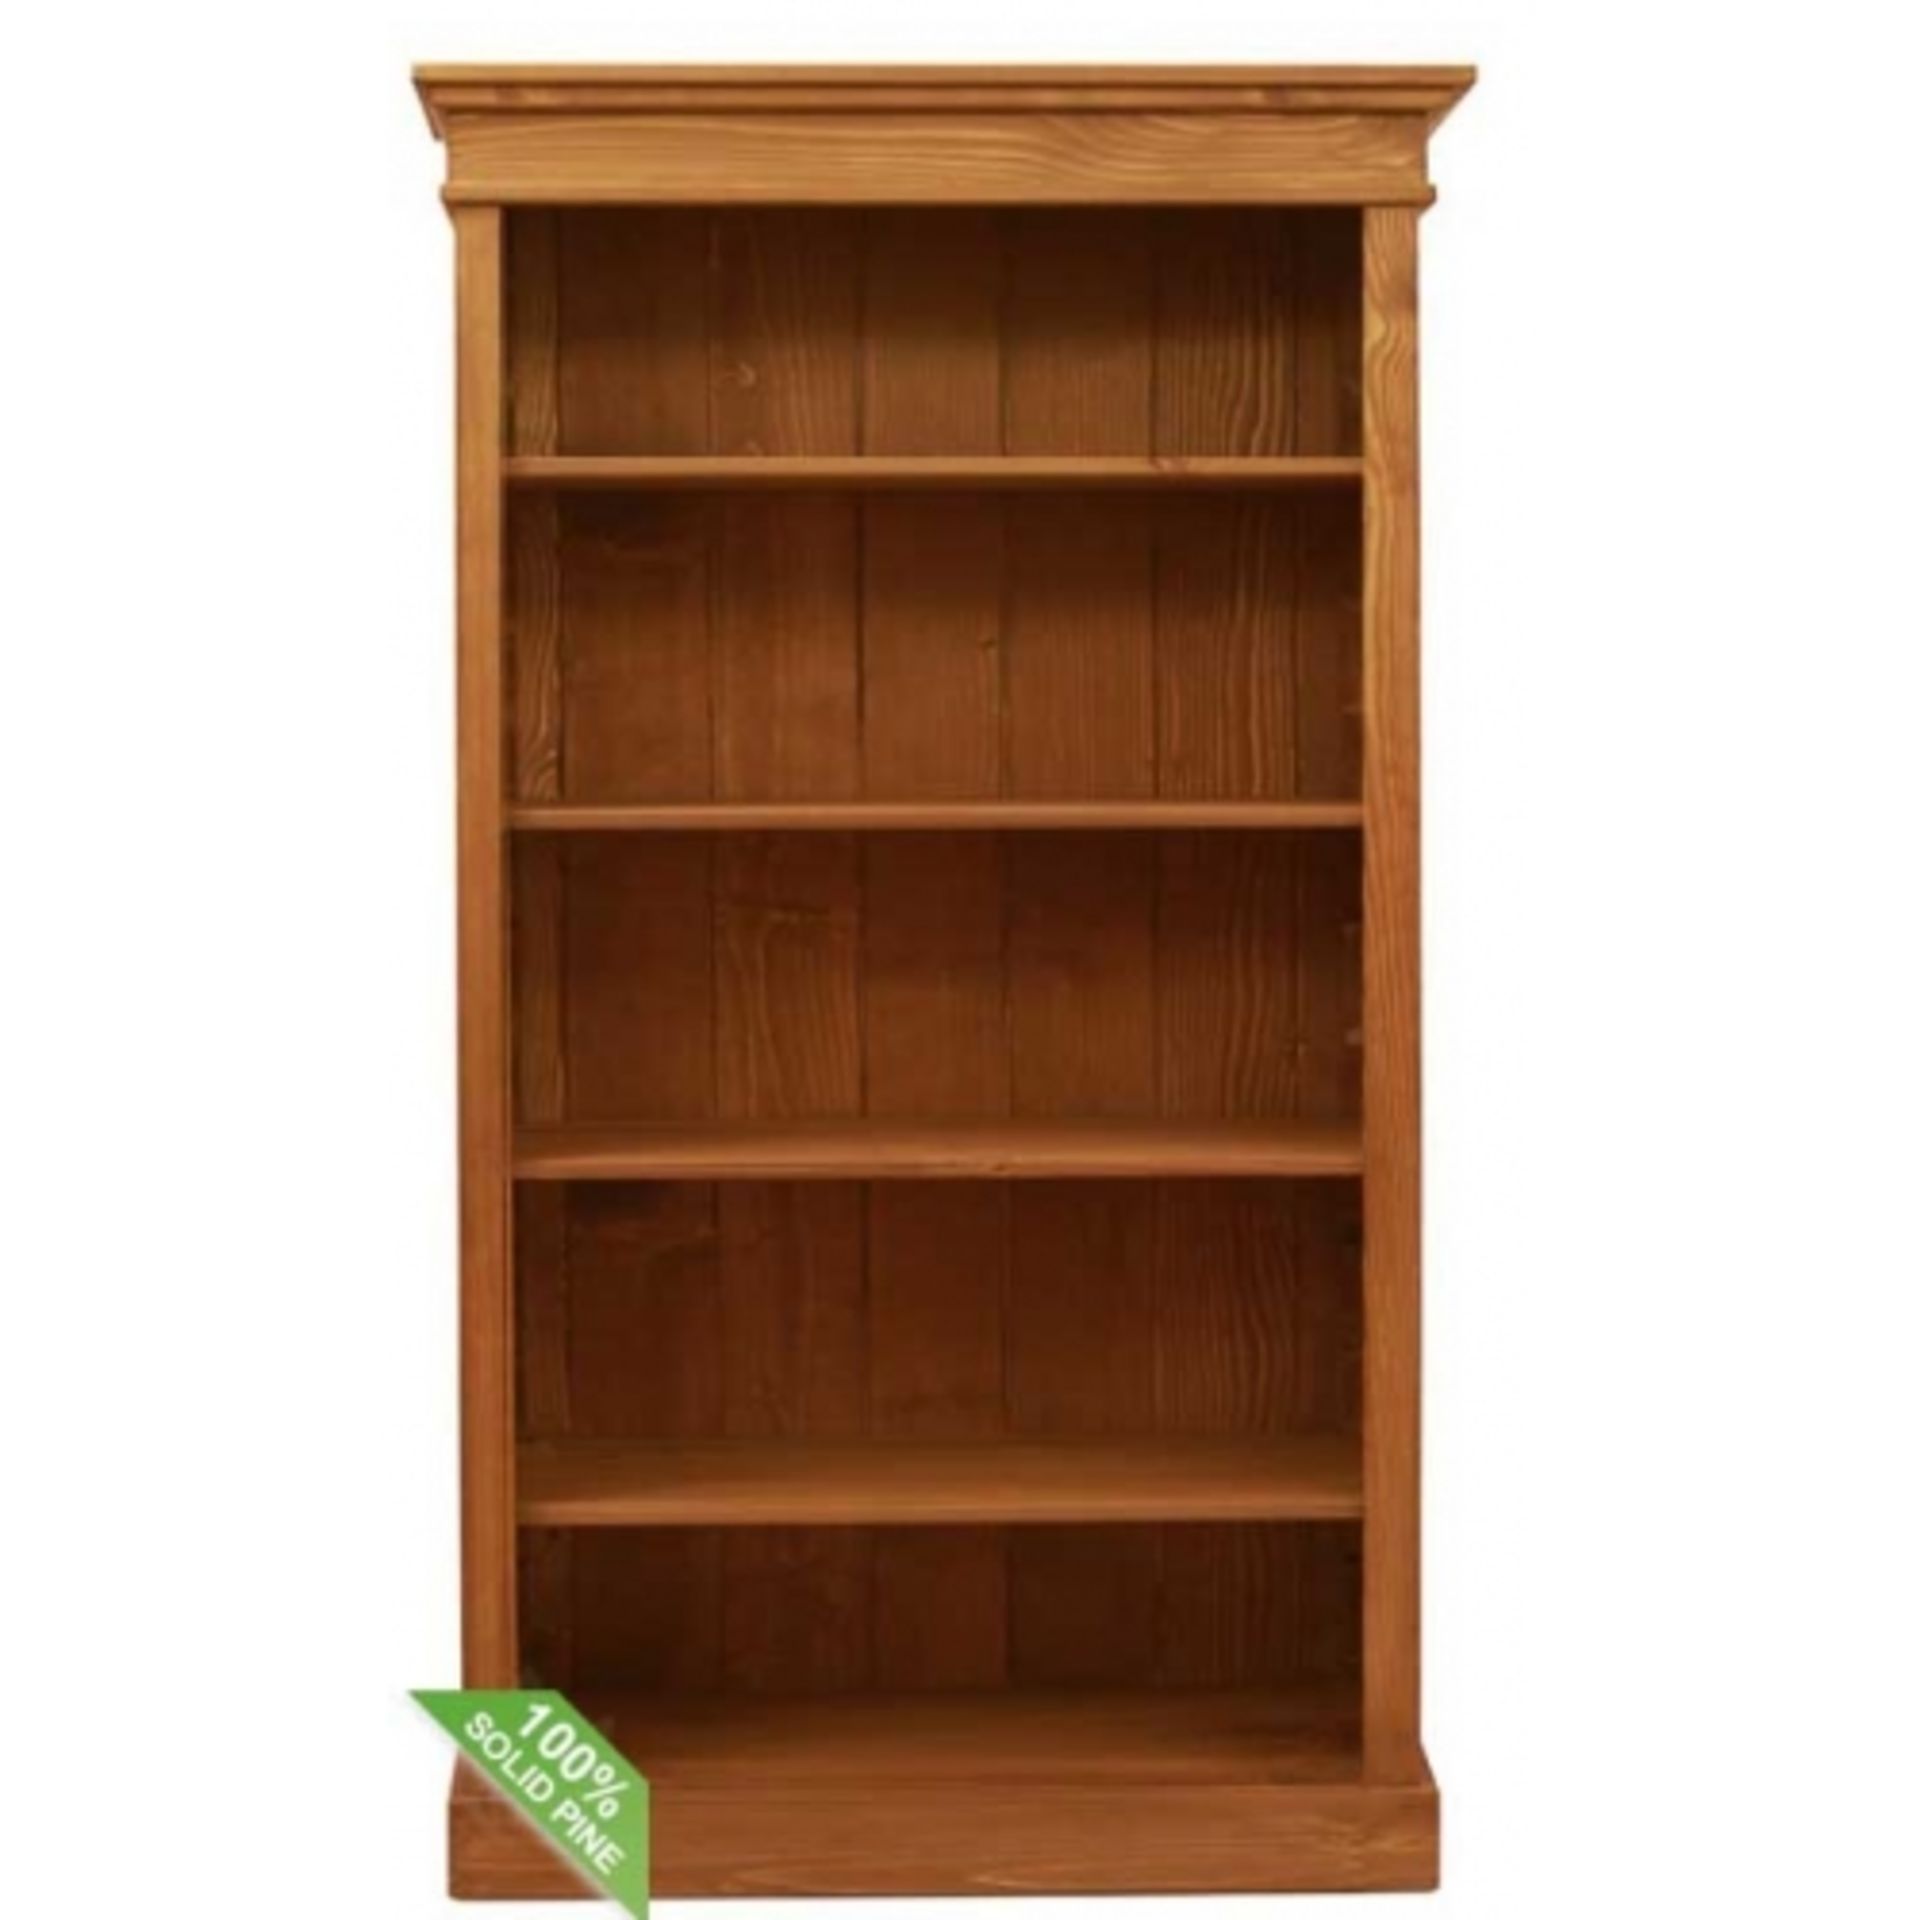 V Grade A Victoria Pine Large Bookcase With Fully Adjustable Internal Shelves (180 x 97 x 30 Cms